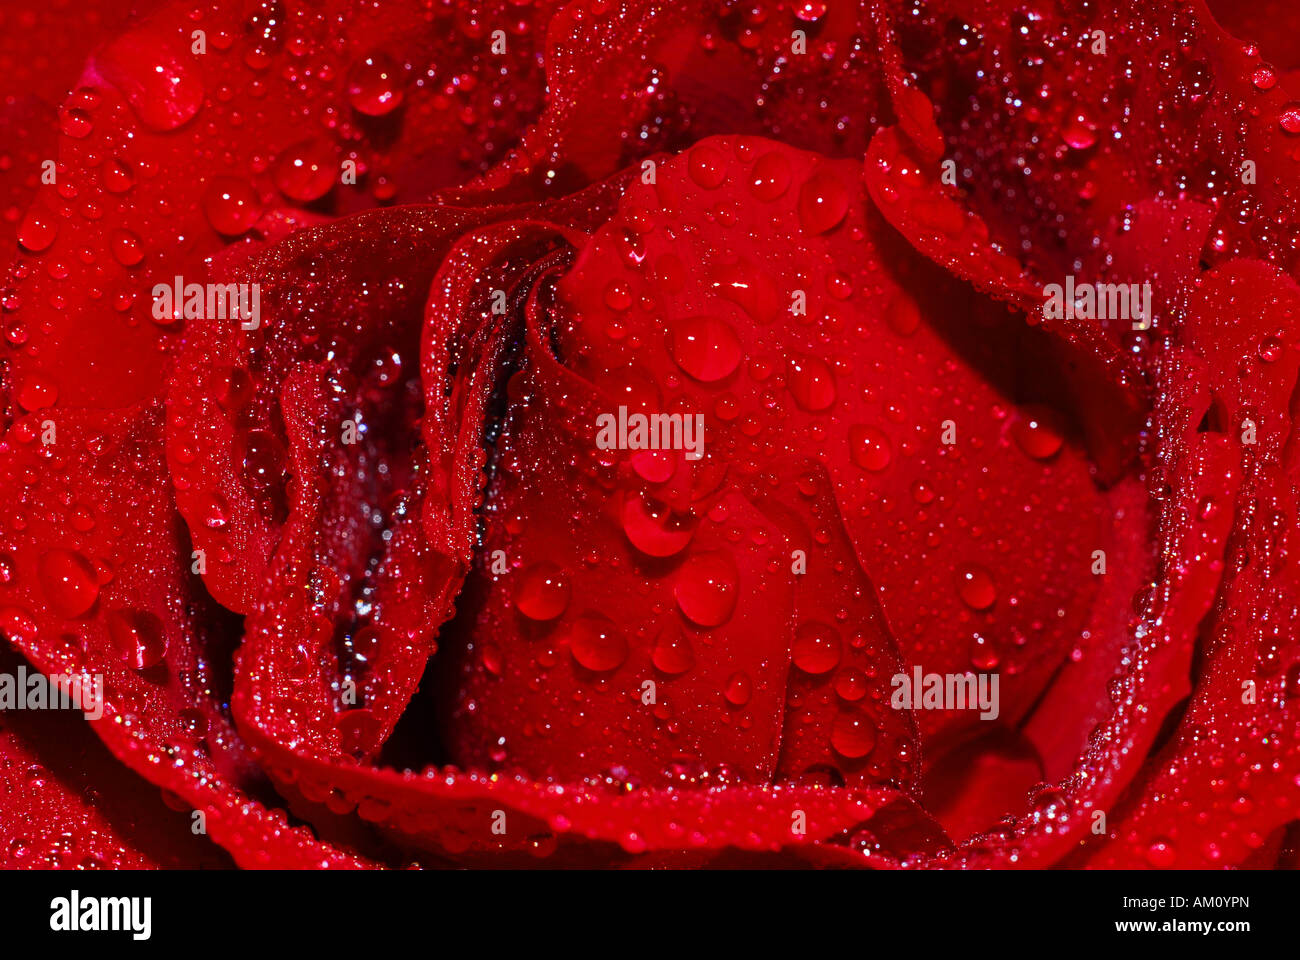 Rose with waterdrops Stock Photo